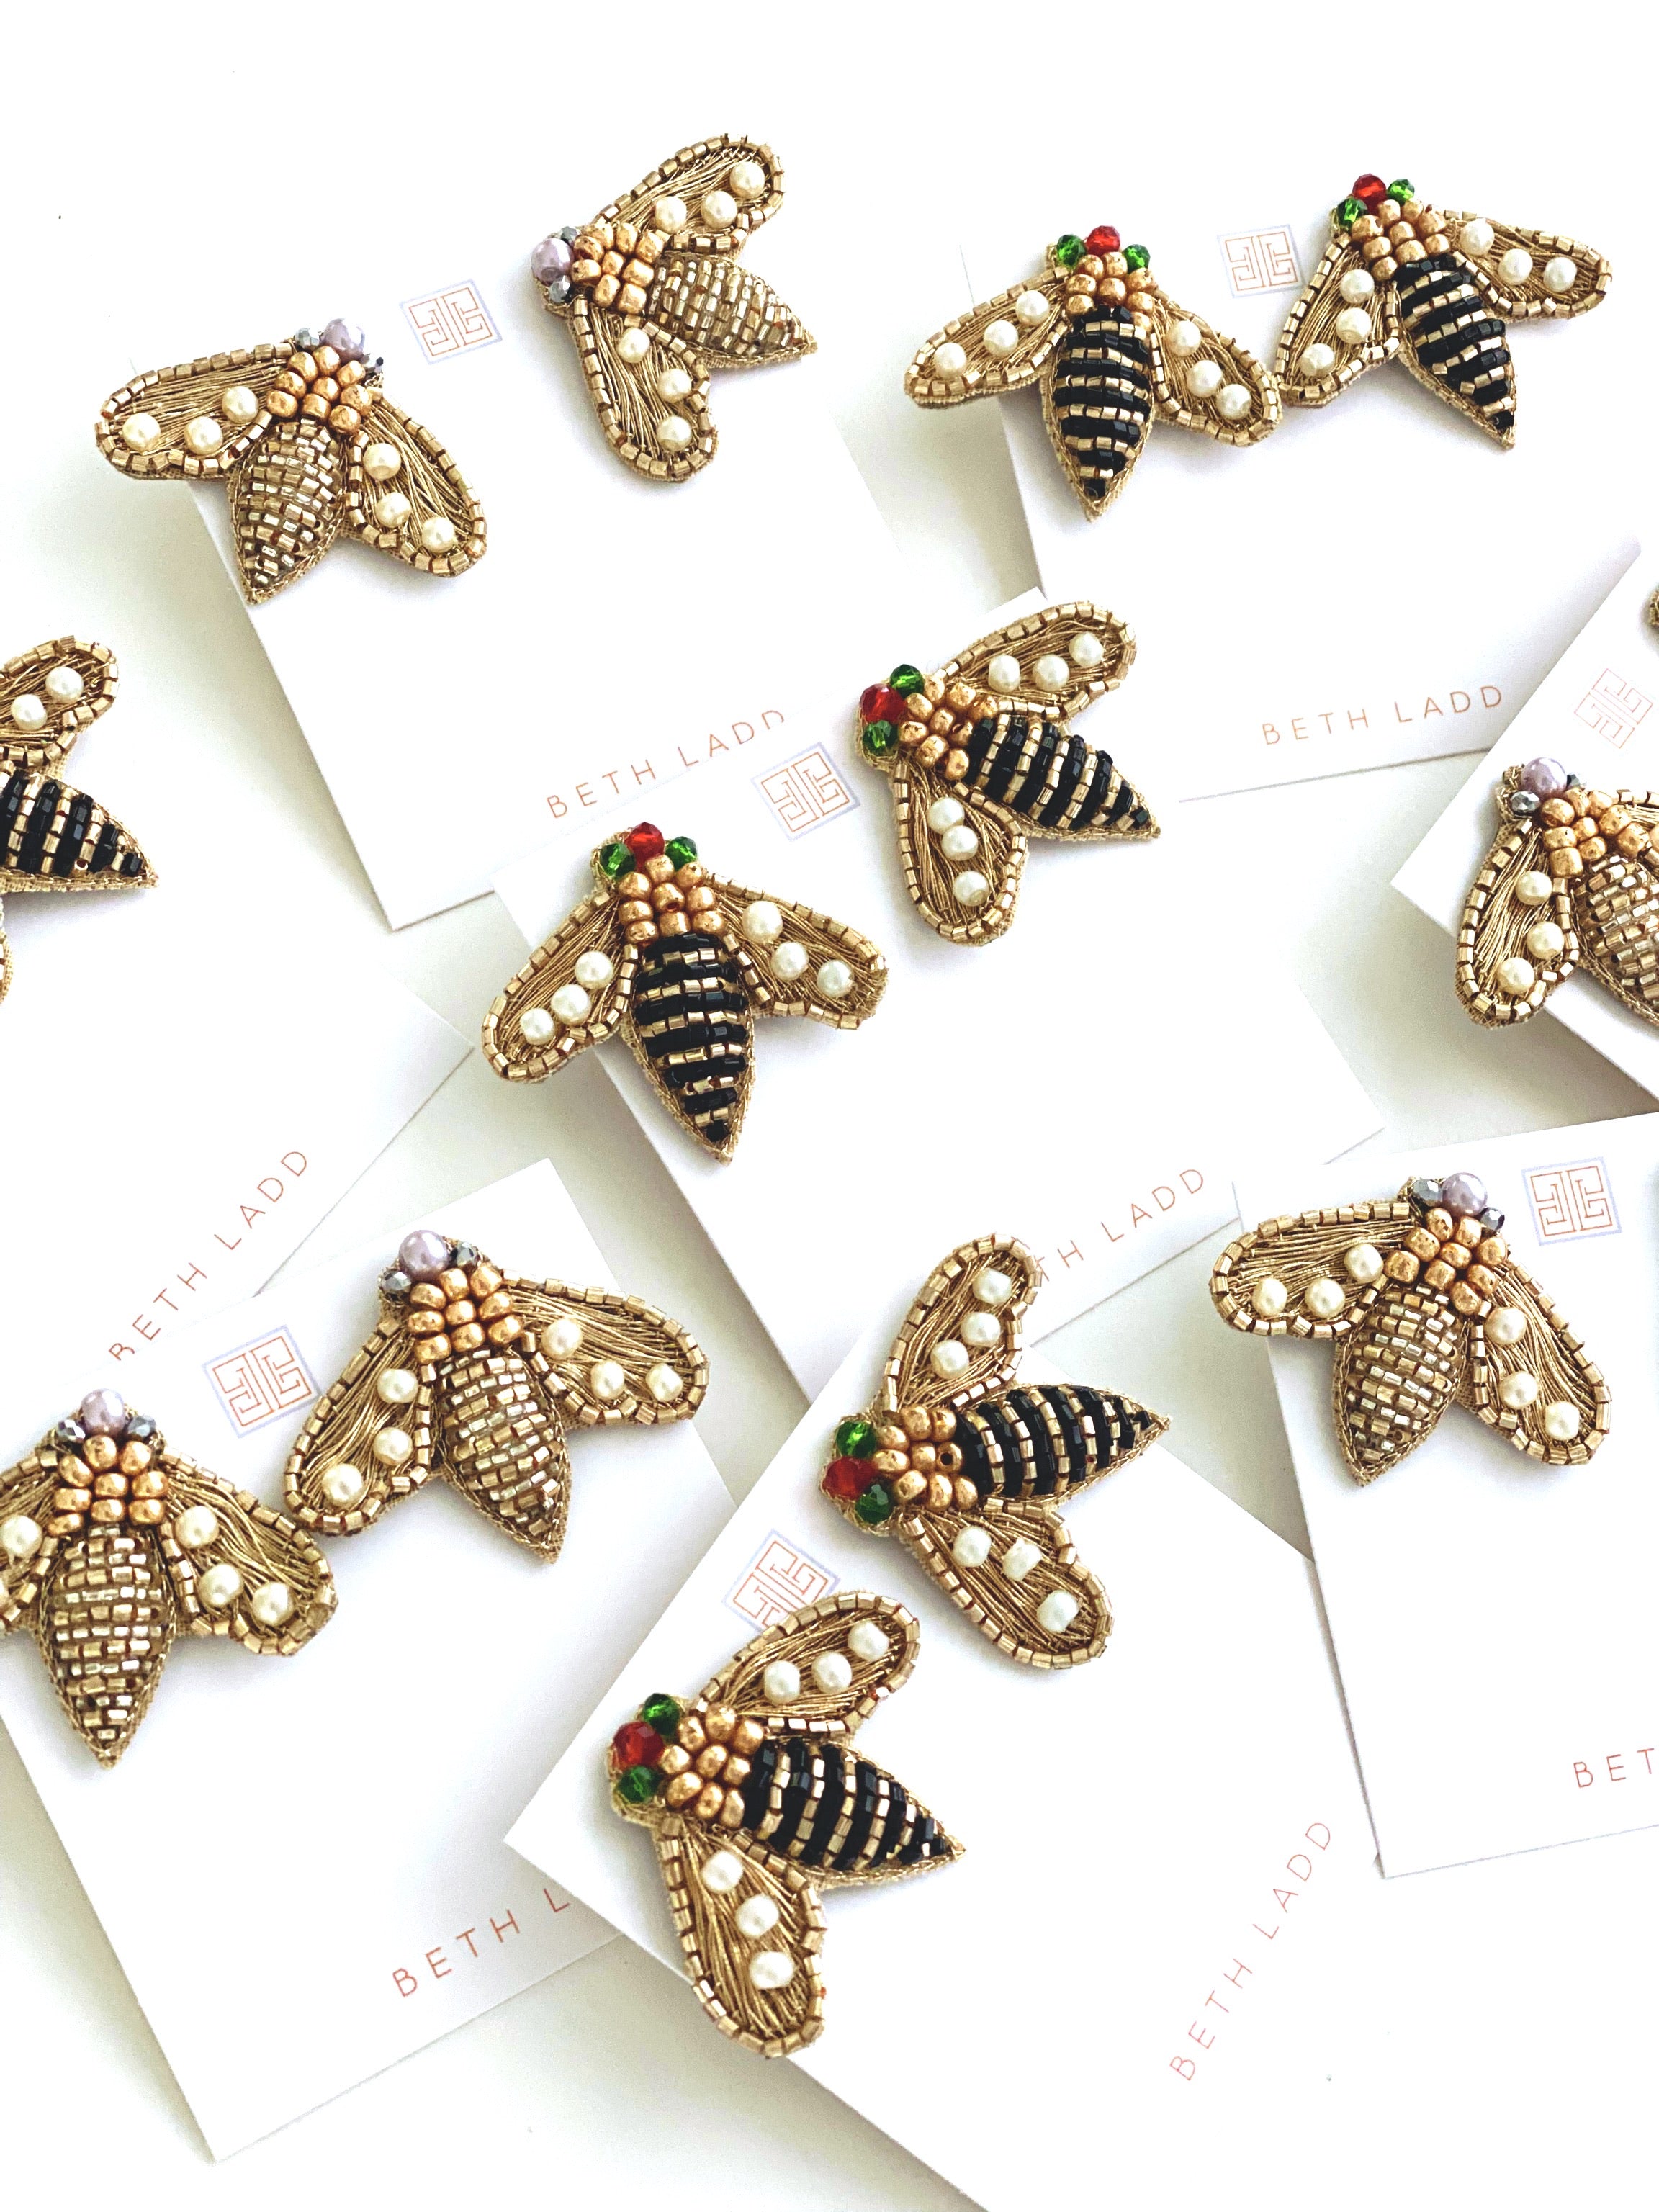 Bee Studs in Gold/Silver/Pearl